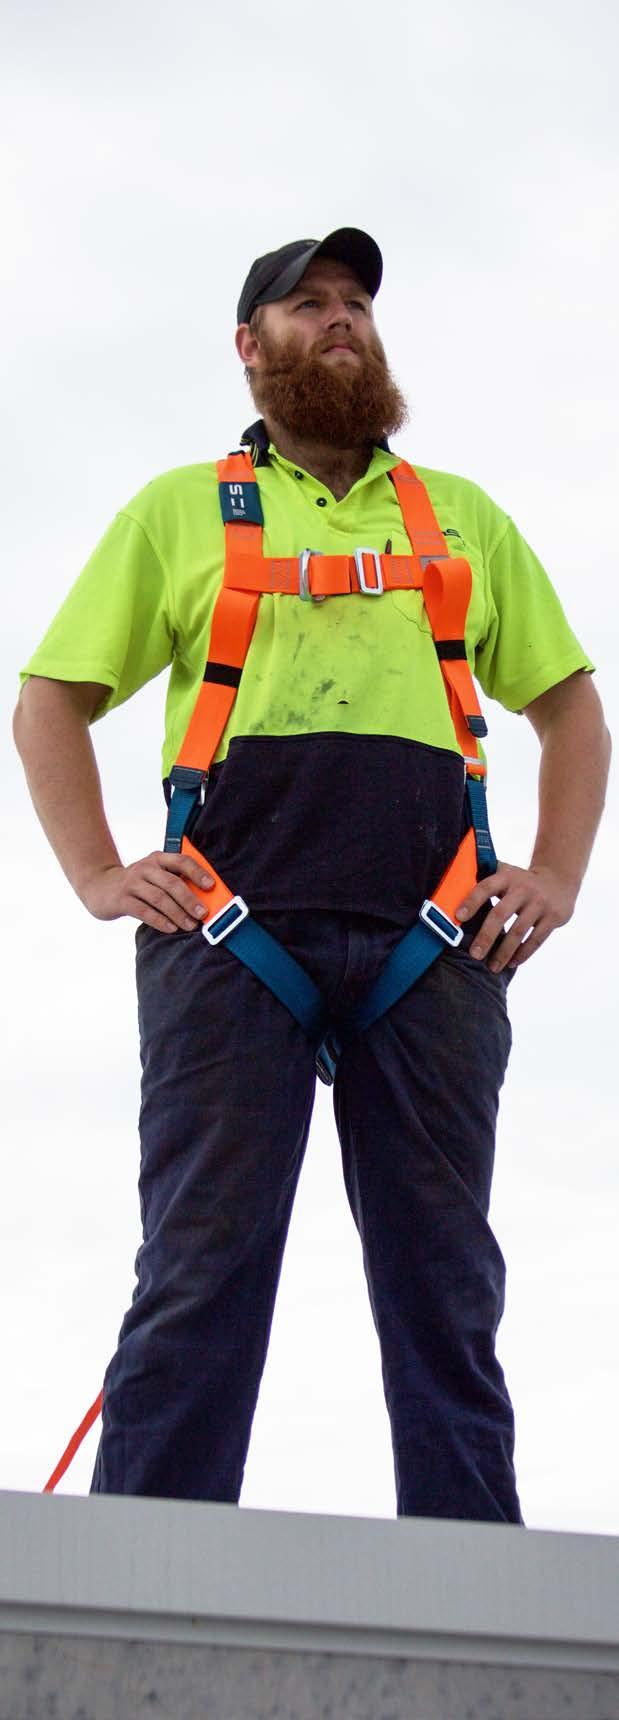 ERGO Harness Range ERGO full body fall arrest harnesses are our most popular range and have now been further improved with the latest technology and manufacturing techniques available.